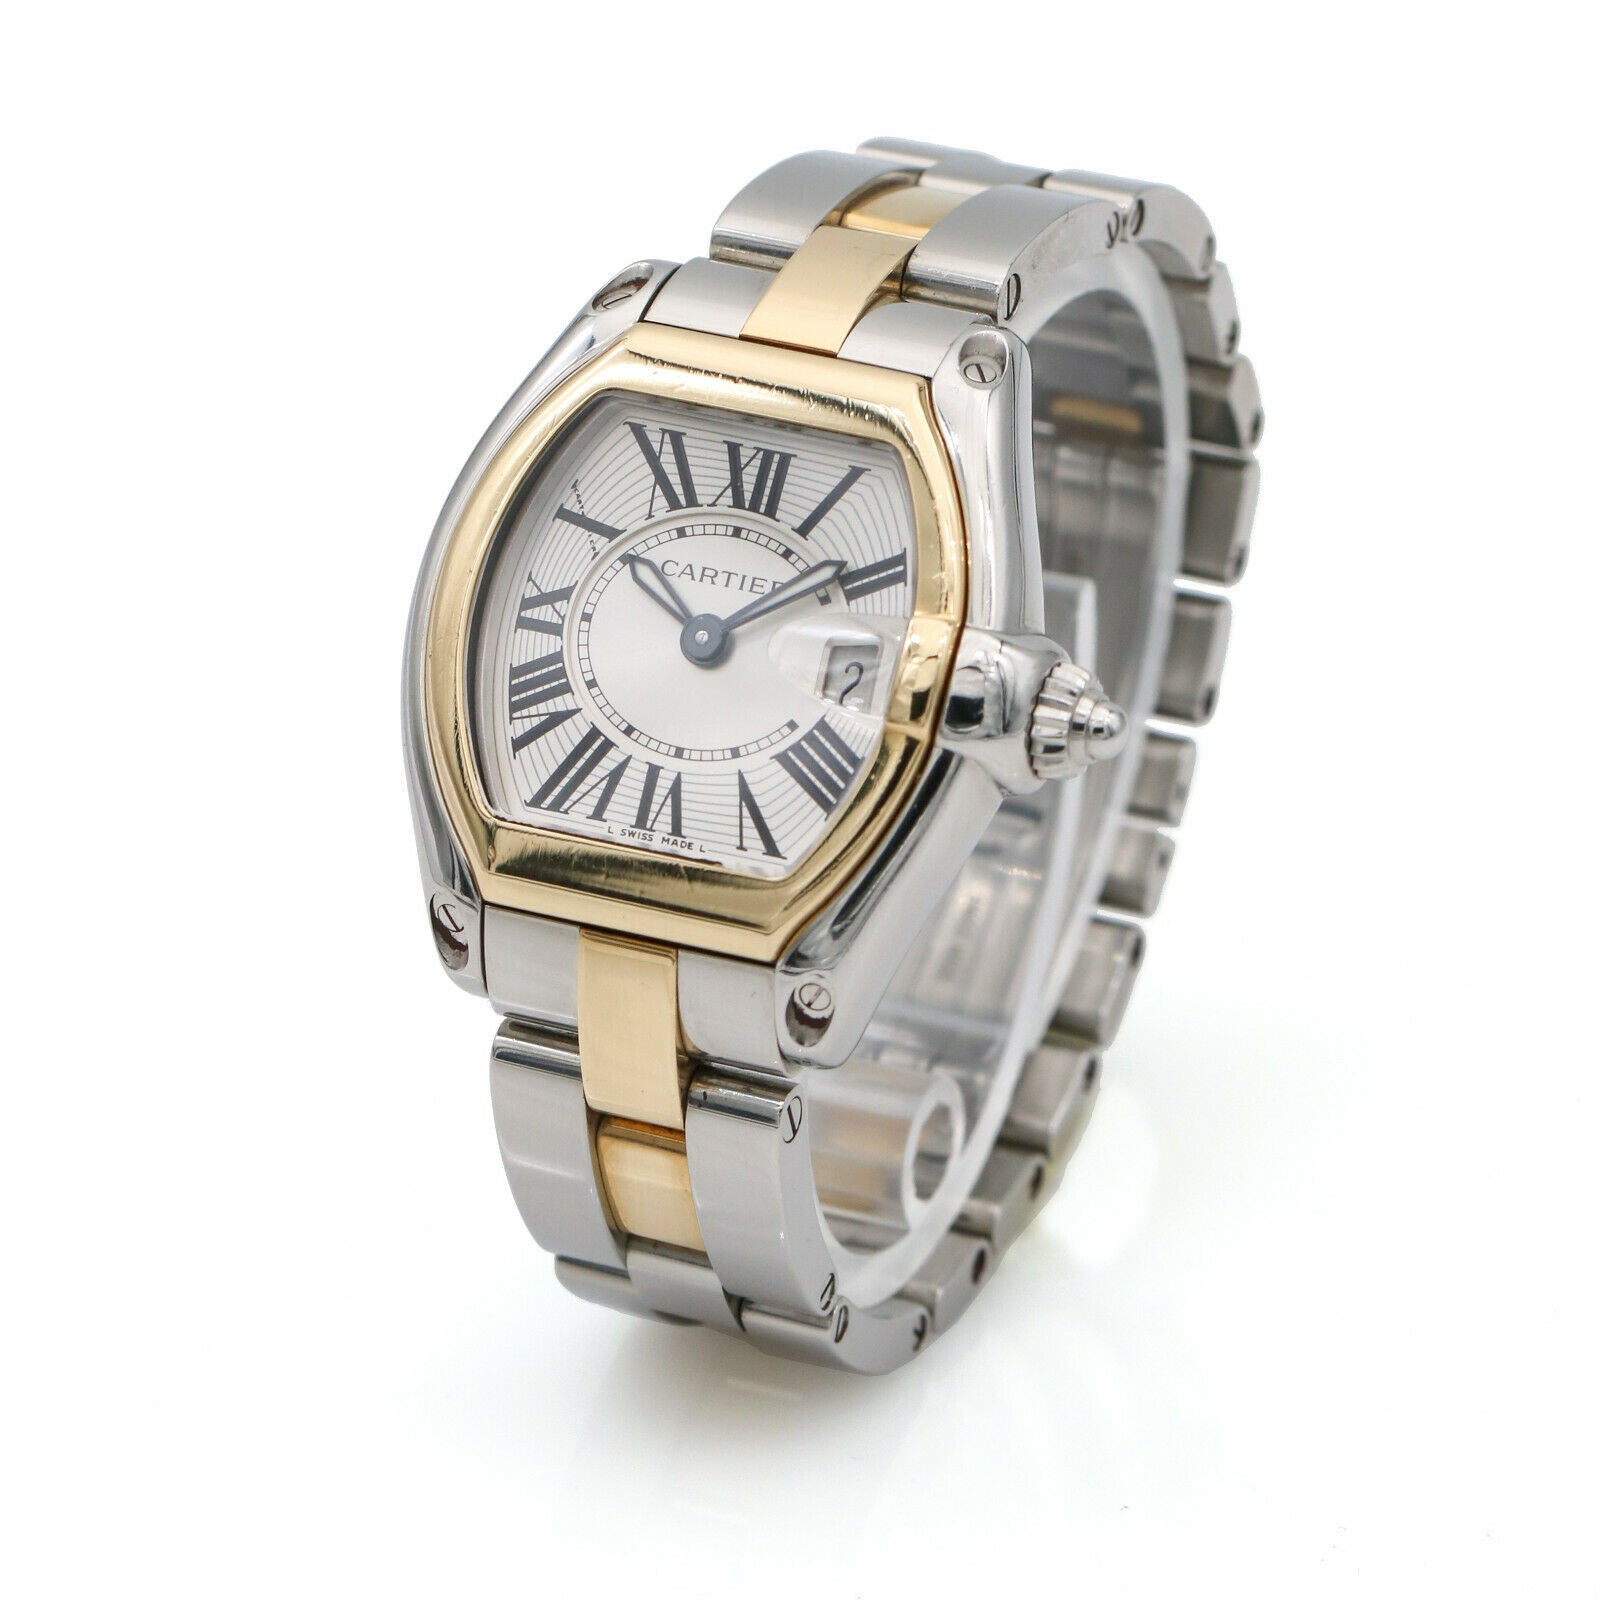 Ladies Cartier Roadster Two-Tone Stainless Steel 18k Gold Watch with Box & Strap